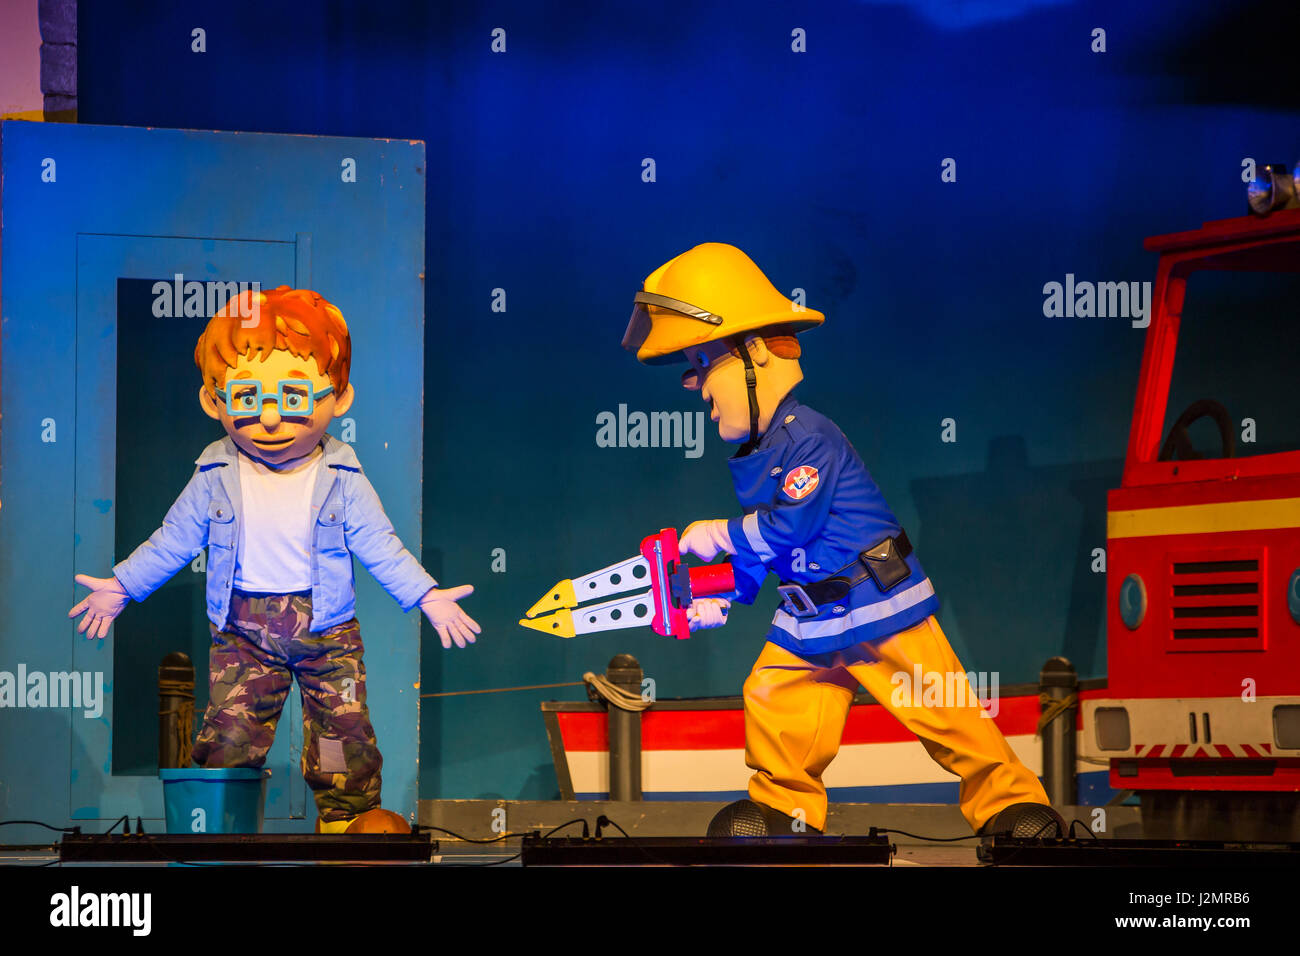 Wetzlar, Germany. 27th April, 2017. Feuerwehrmann Sam Live: Pontypandy rockt!, German children's theater adaptation of Welsh-British animated comedy children's television series Fireman Sam by Theater auf Tour Darmstadt/Germany (in cooperation with Van Hoorne Entertainment, Netherlands). Performance at Stadthalle Wetzlar. Characters in scene: The boy Norman Price is saved by Fireman Sam. --- Fotocredit: Christian Lademann Stock Photo